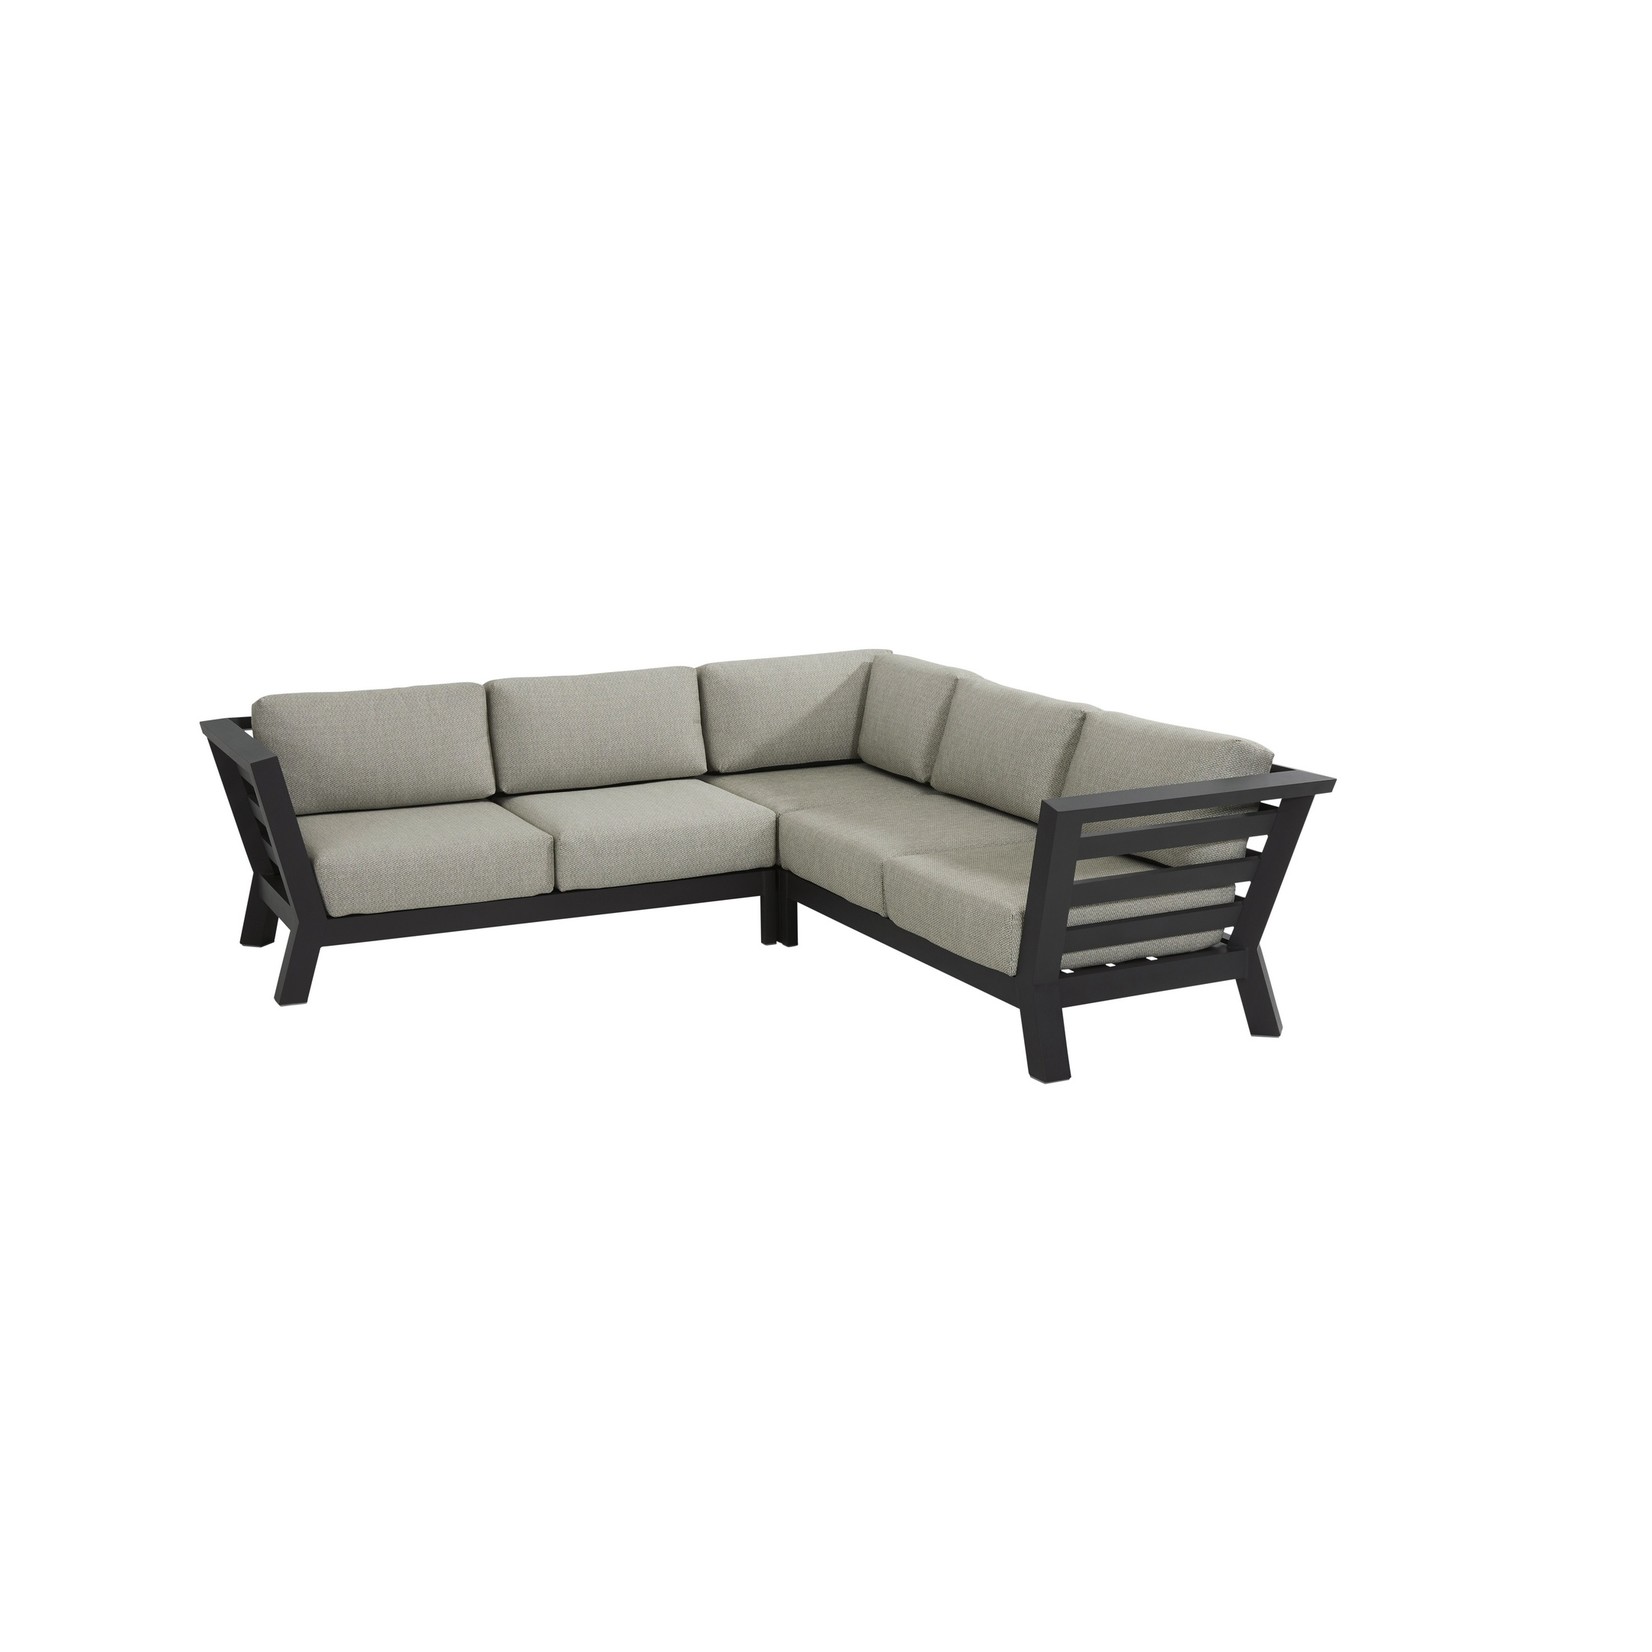 4SO 4SO Meteoro modular 2 seater bench R arm with 4 cushions